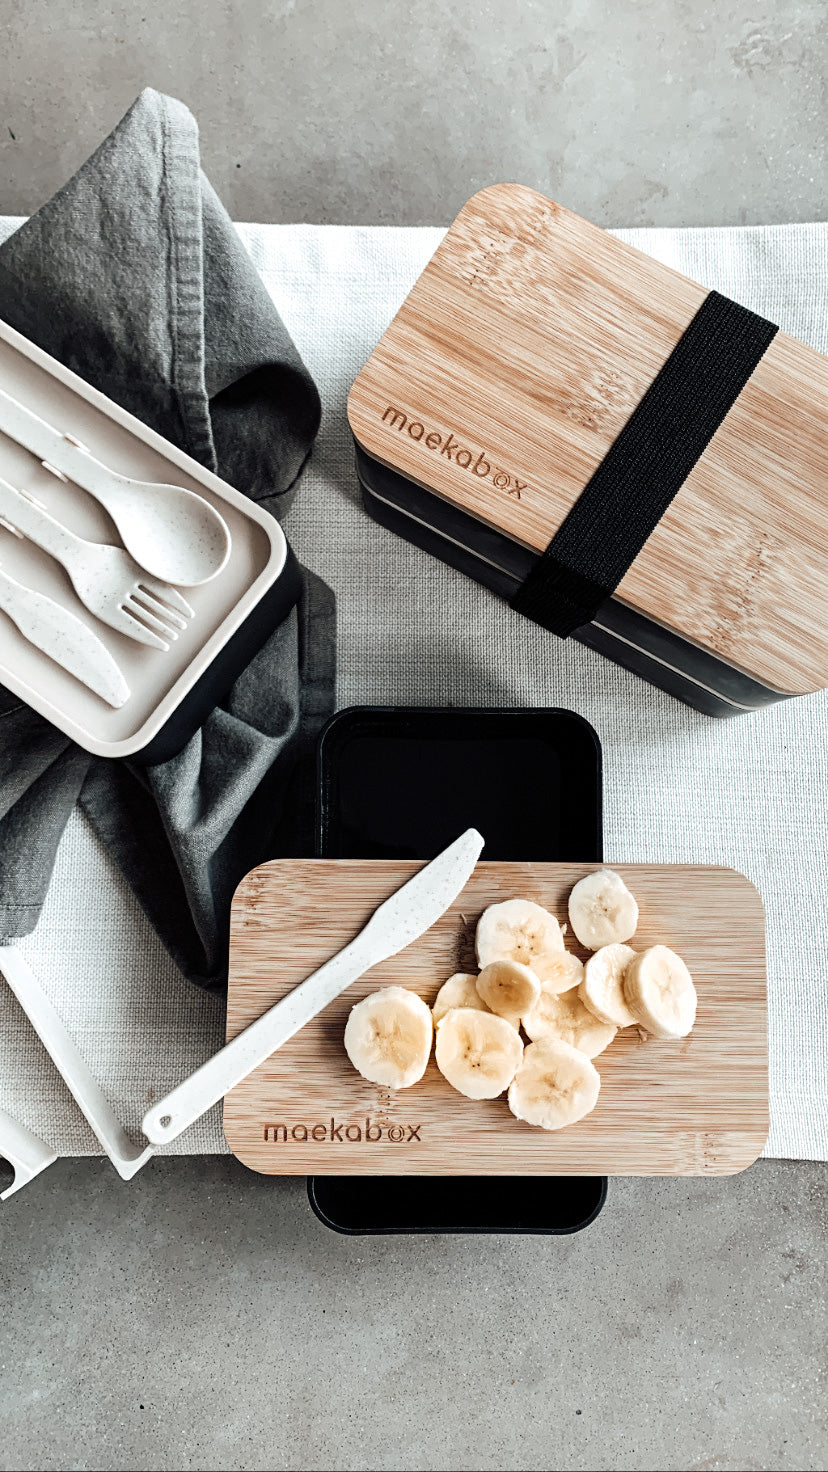 This double layered, BPA free, marked and measured bento box takes the guess work out of estimating portions. The multipurpose bamboo lid can be used as a cutting board for soft foods or as a tray. 